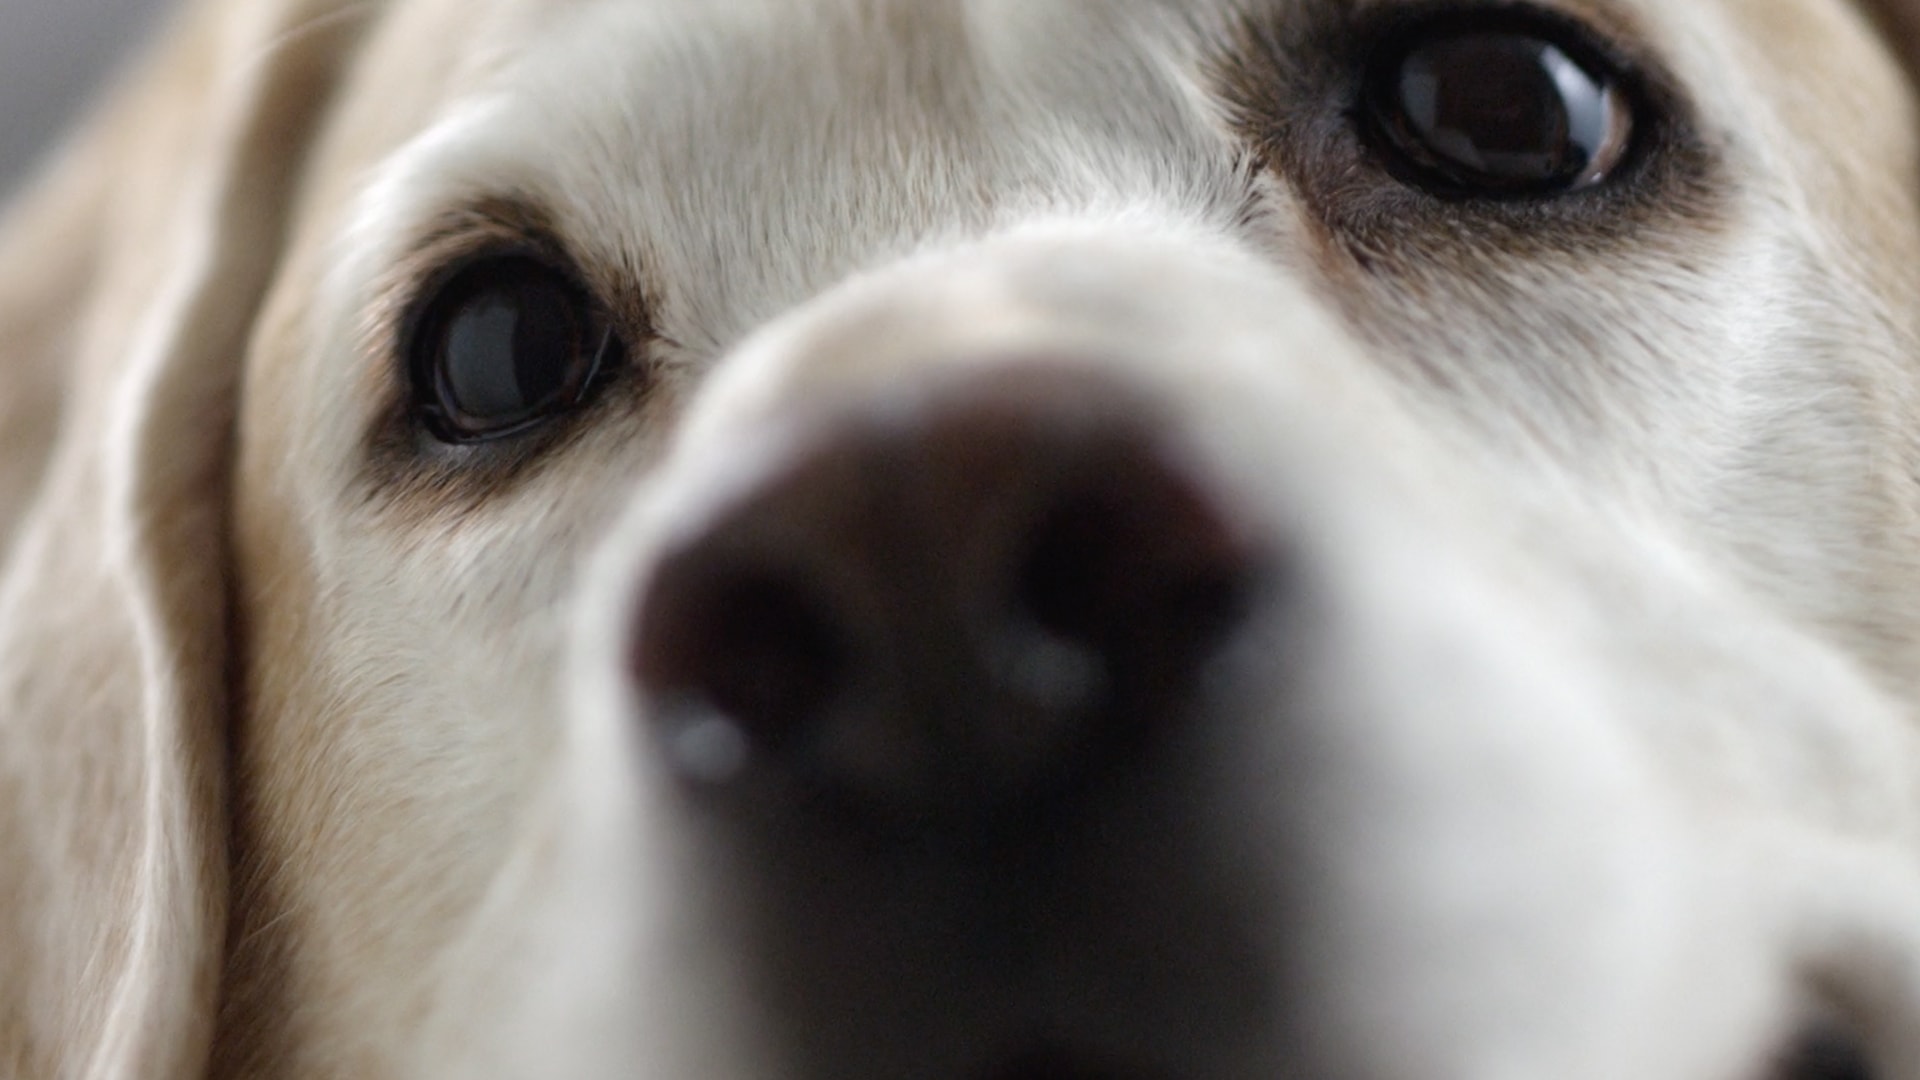 A very close up shot of a golden reteriever's snout and eyes.